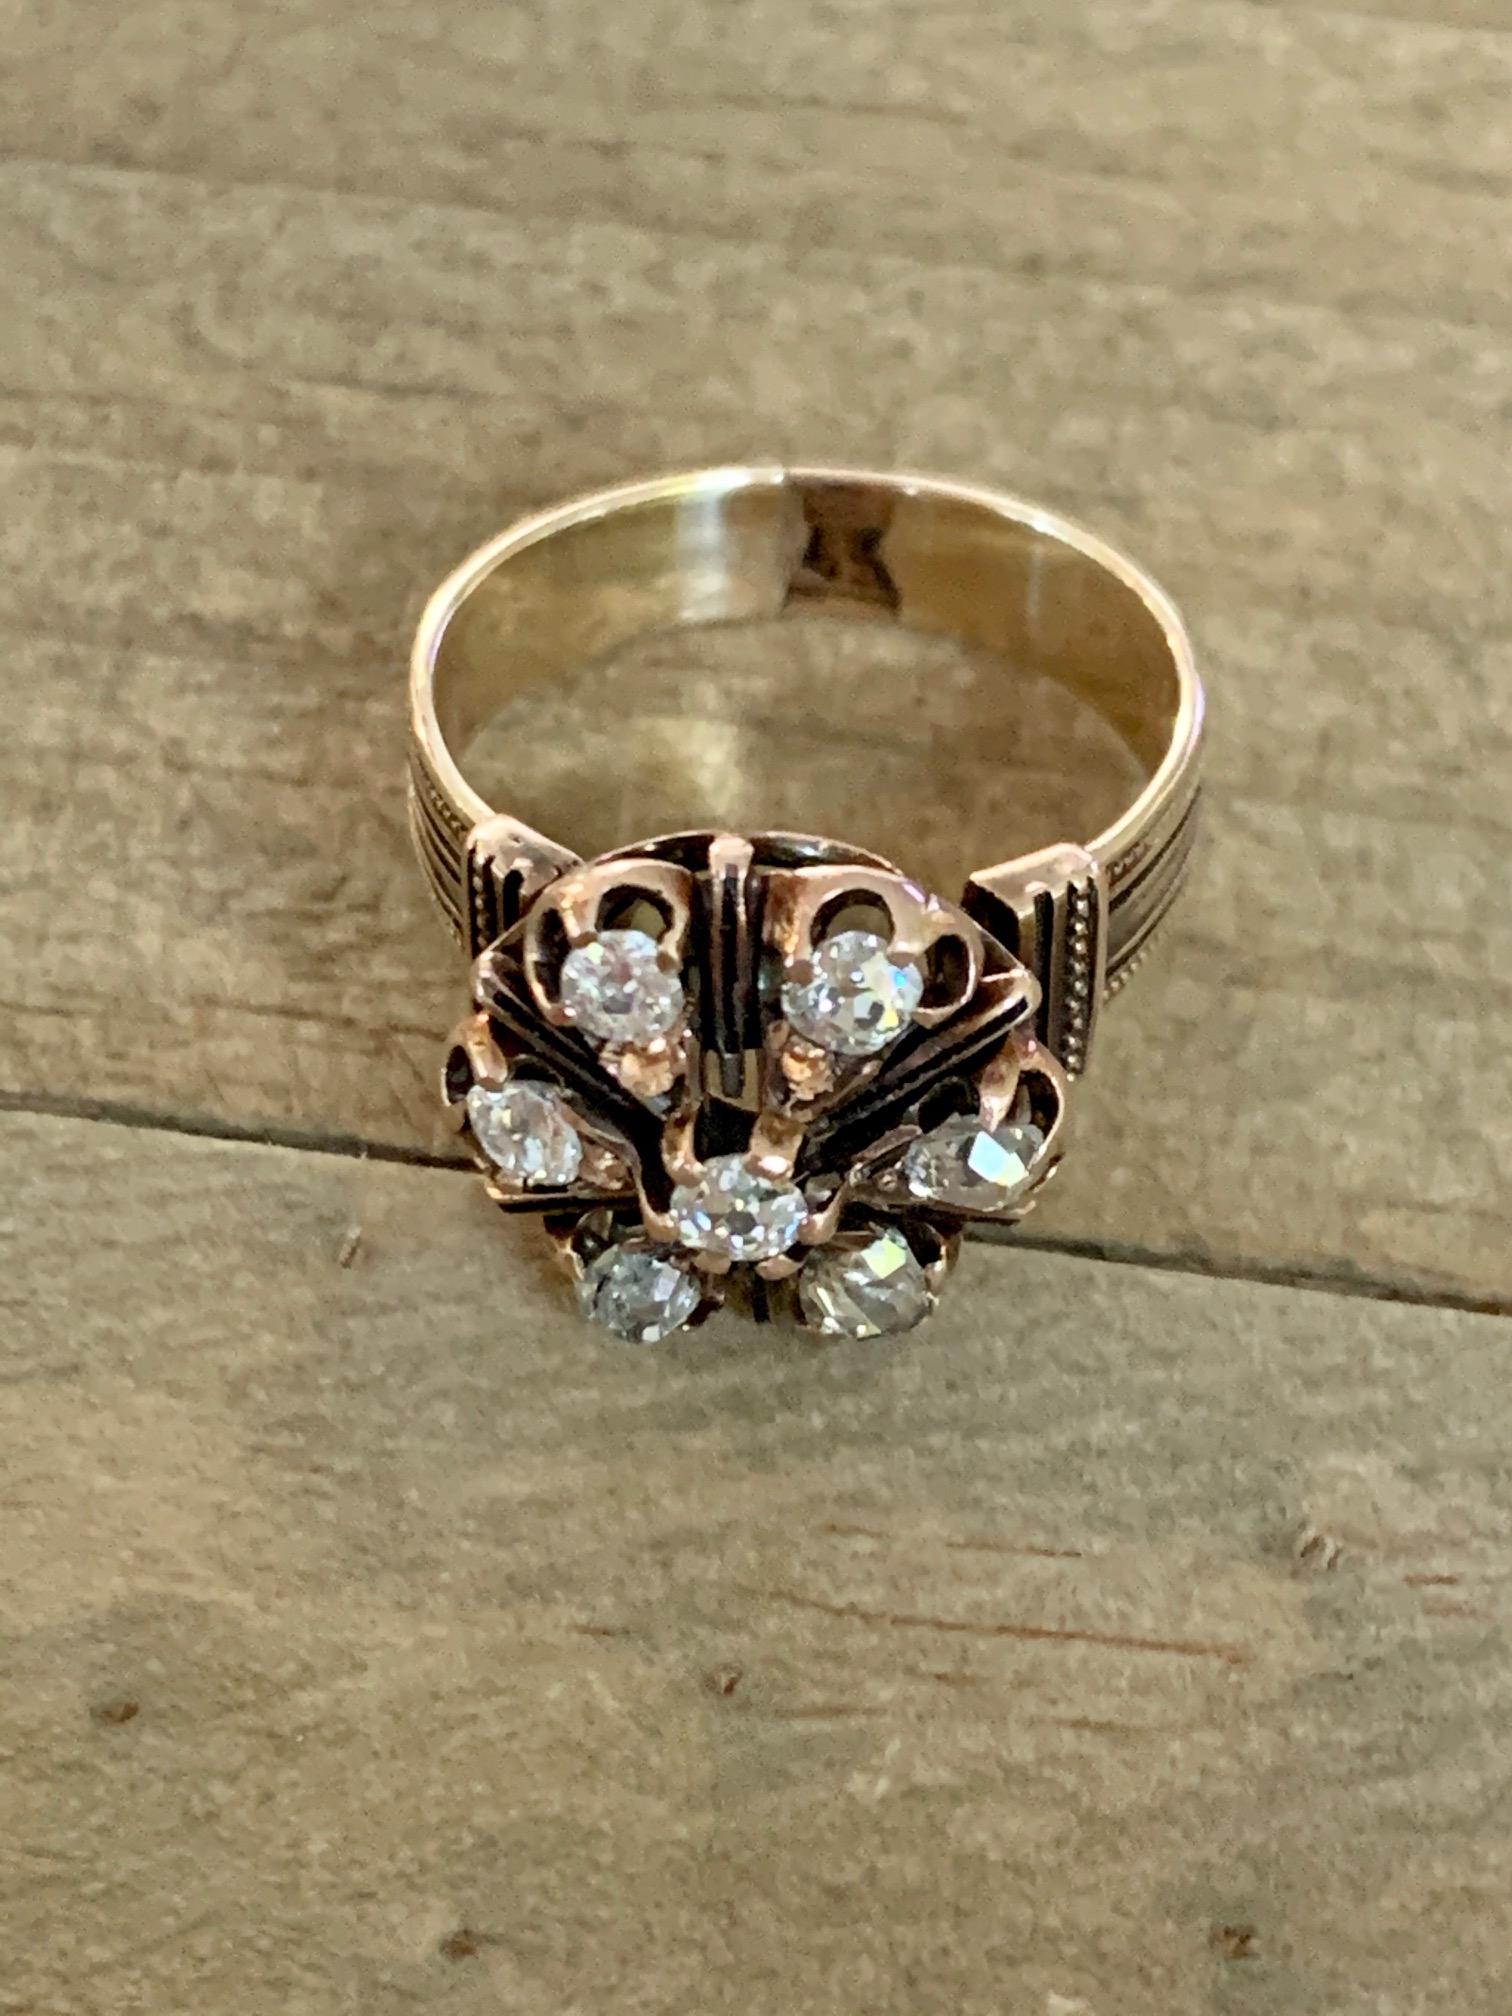 This Victorian 14k yellow Gold ring features seven Euro and mine cut Diamonds totaling approxmately .70ctw.
Average grade: SI-GH

Weight: 5.7 grams
Size 7 3/4 - -This ring can be resized, but G. Lindberg Jewels does not provide sizing services. We